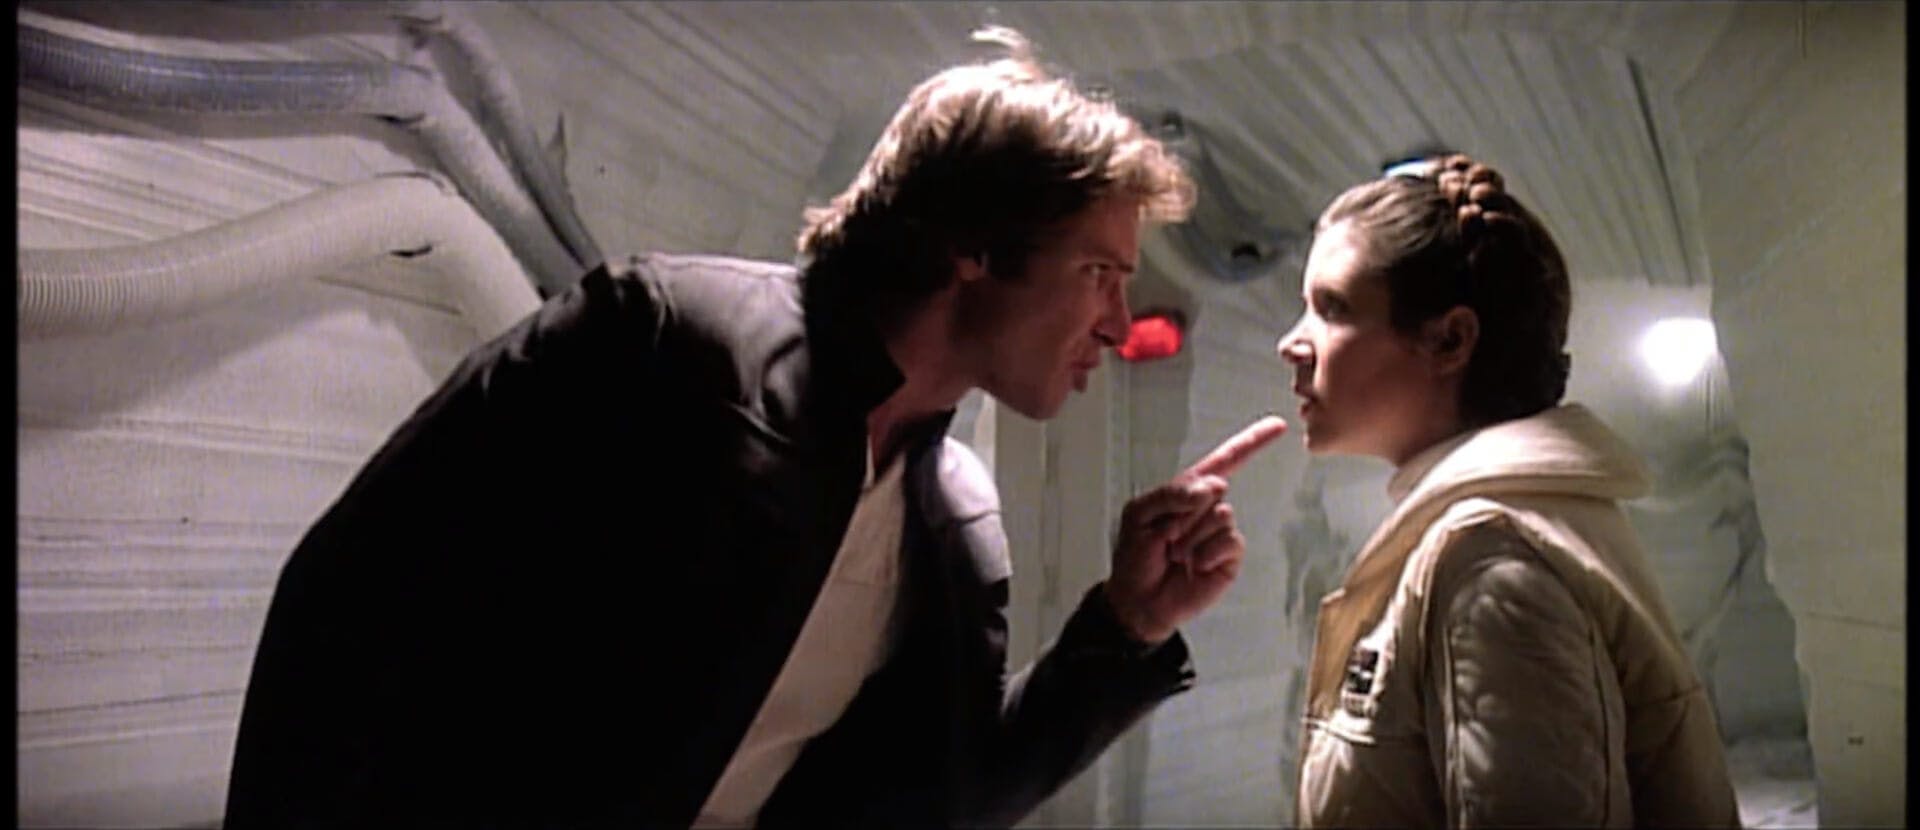 The Empire Strikes Back - Han and Leia